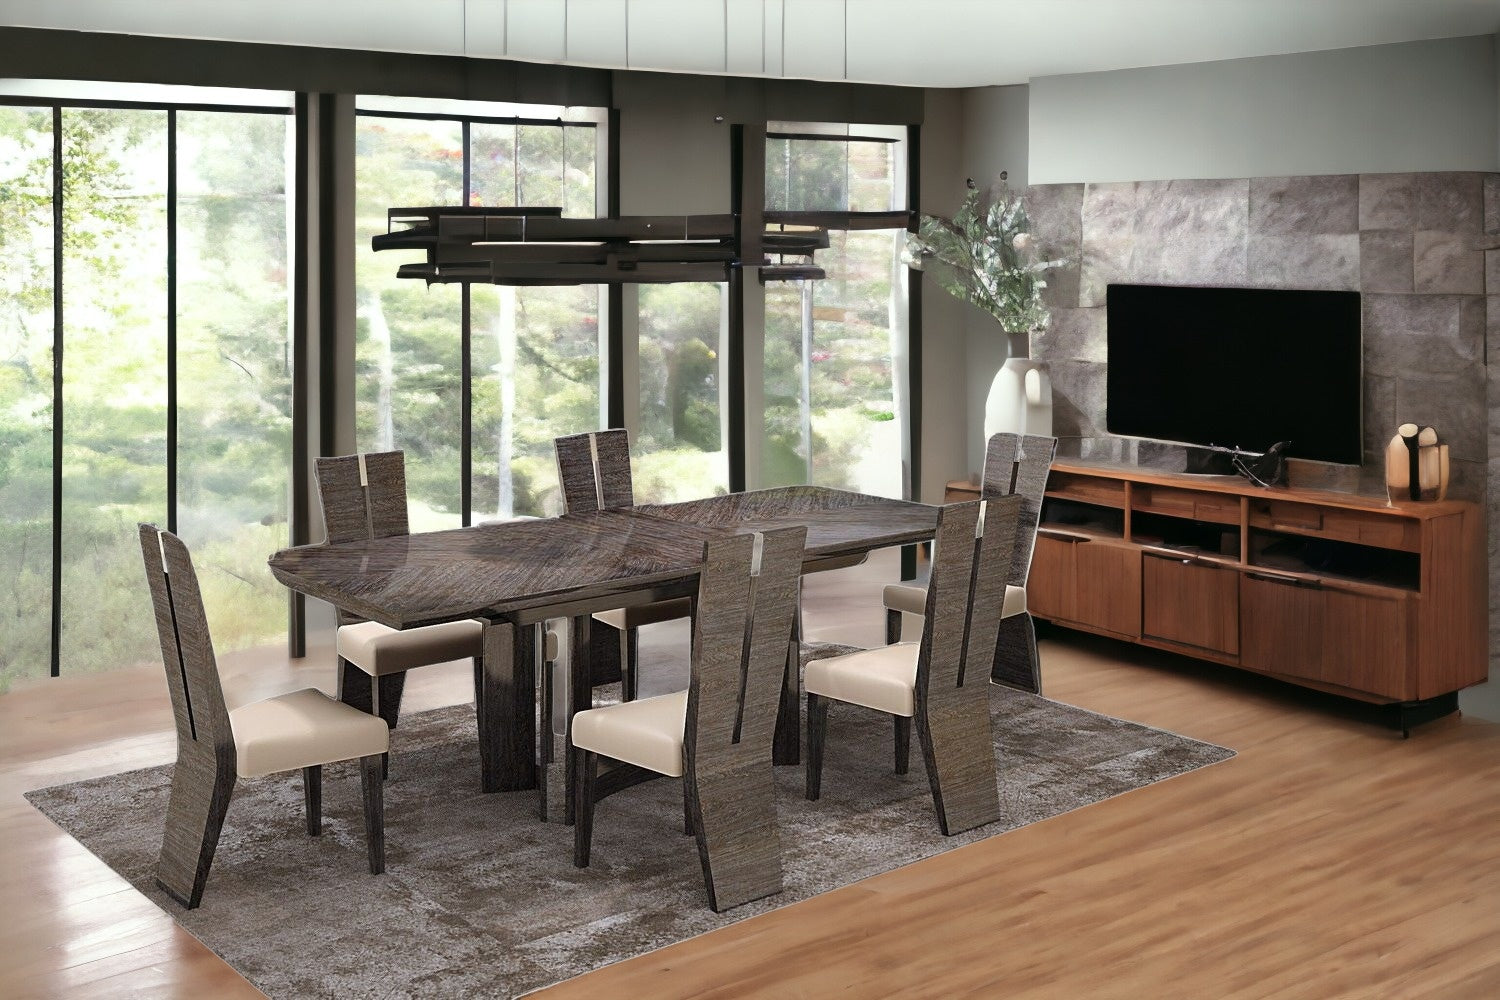 Seven Piece Gray Dining Set with Six Chairs